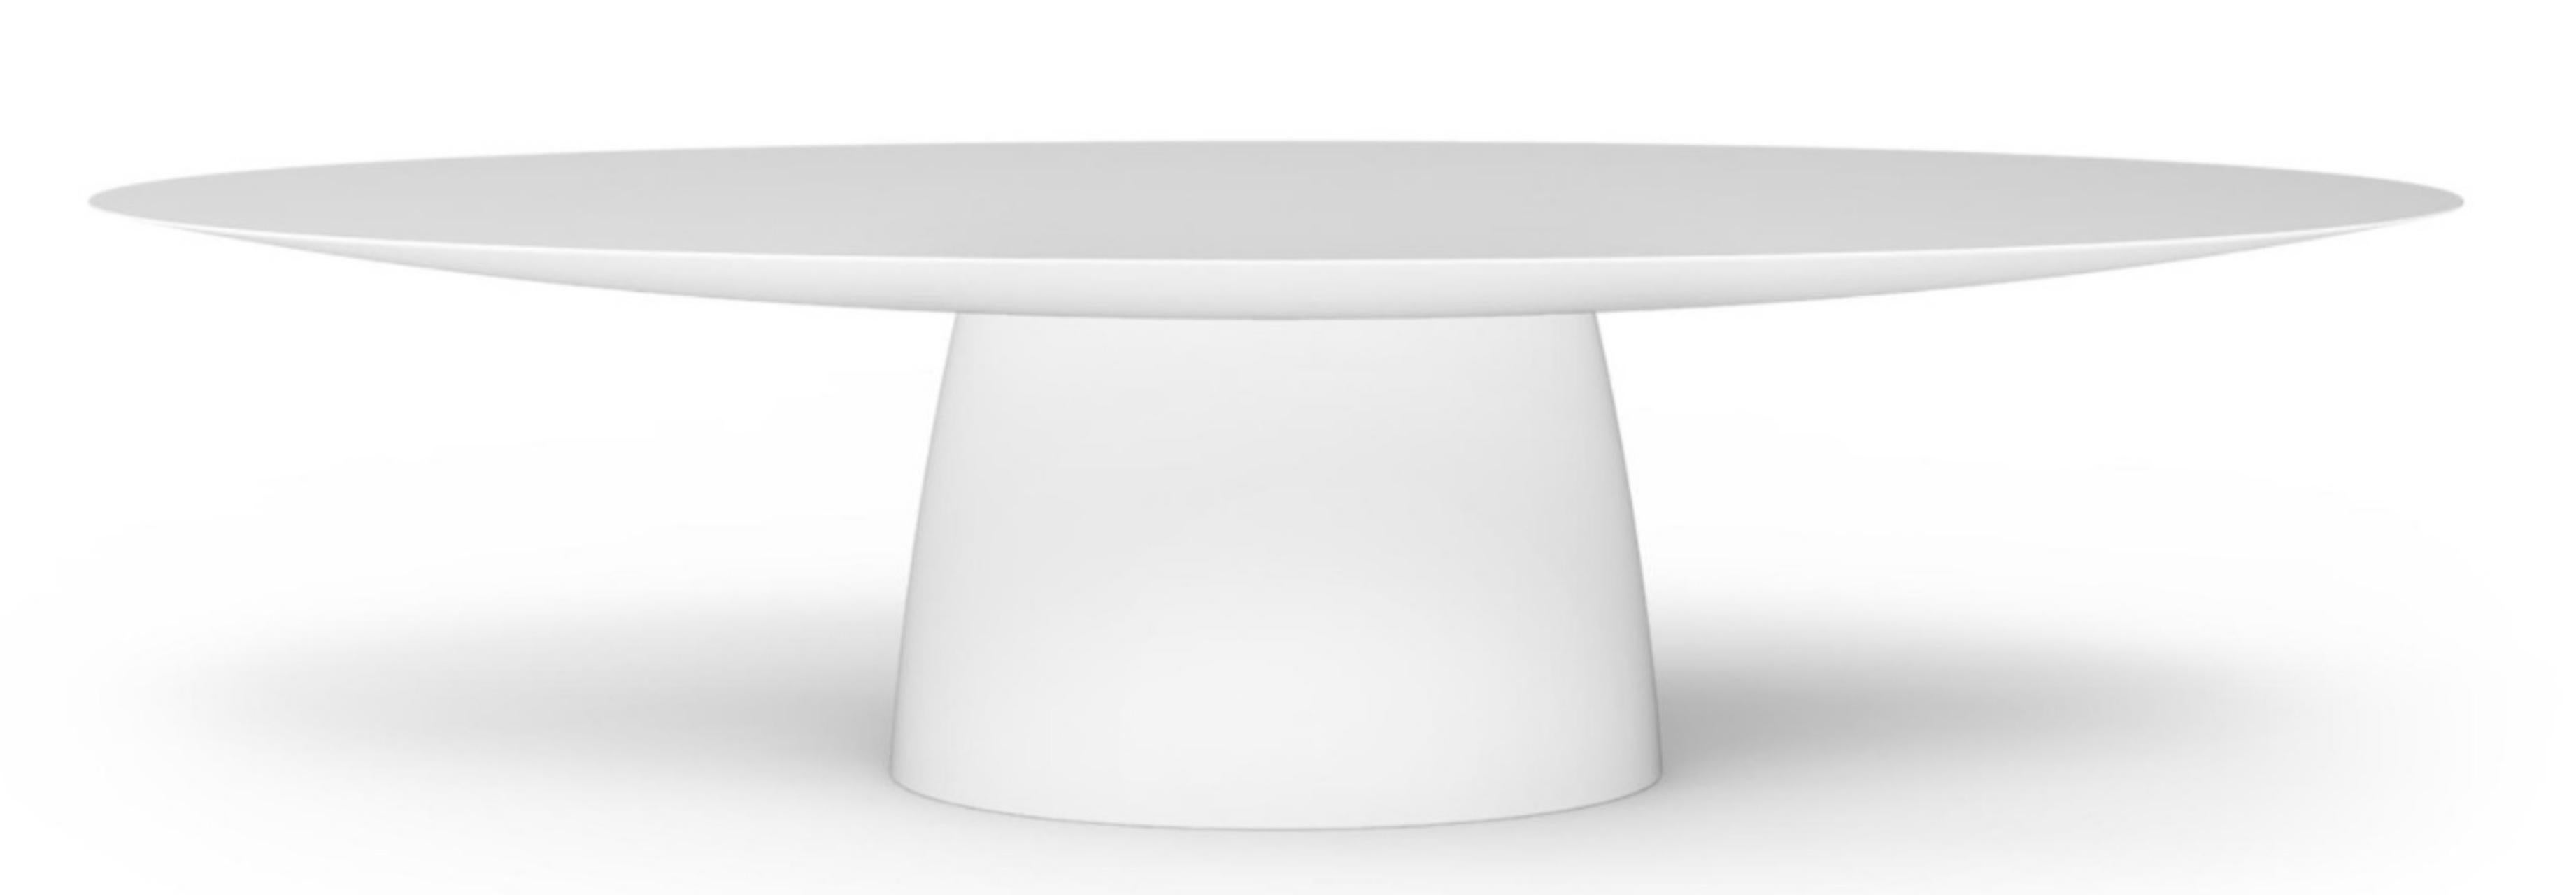 SUMMER 2024

Dining table.

General information.

Dimensions (cm): 300 x 130 x 75.
Dimensions (in): 118.1 x 51.2 x 29.5.
weight (kg): 85
weight (lbs): 187.4
seat: 8 to 10

Materials and colors.

Structure: resin reinforced with fiberglass, lacquered